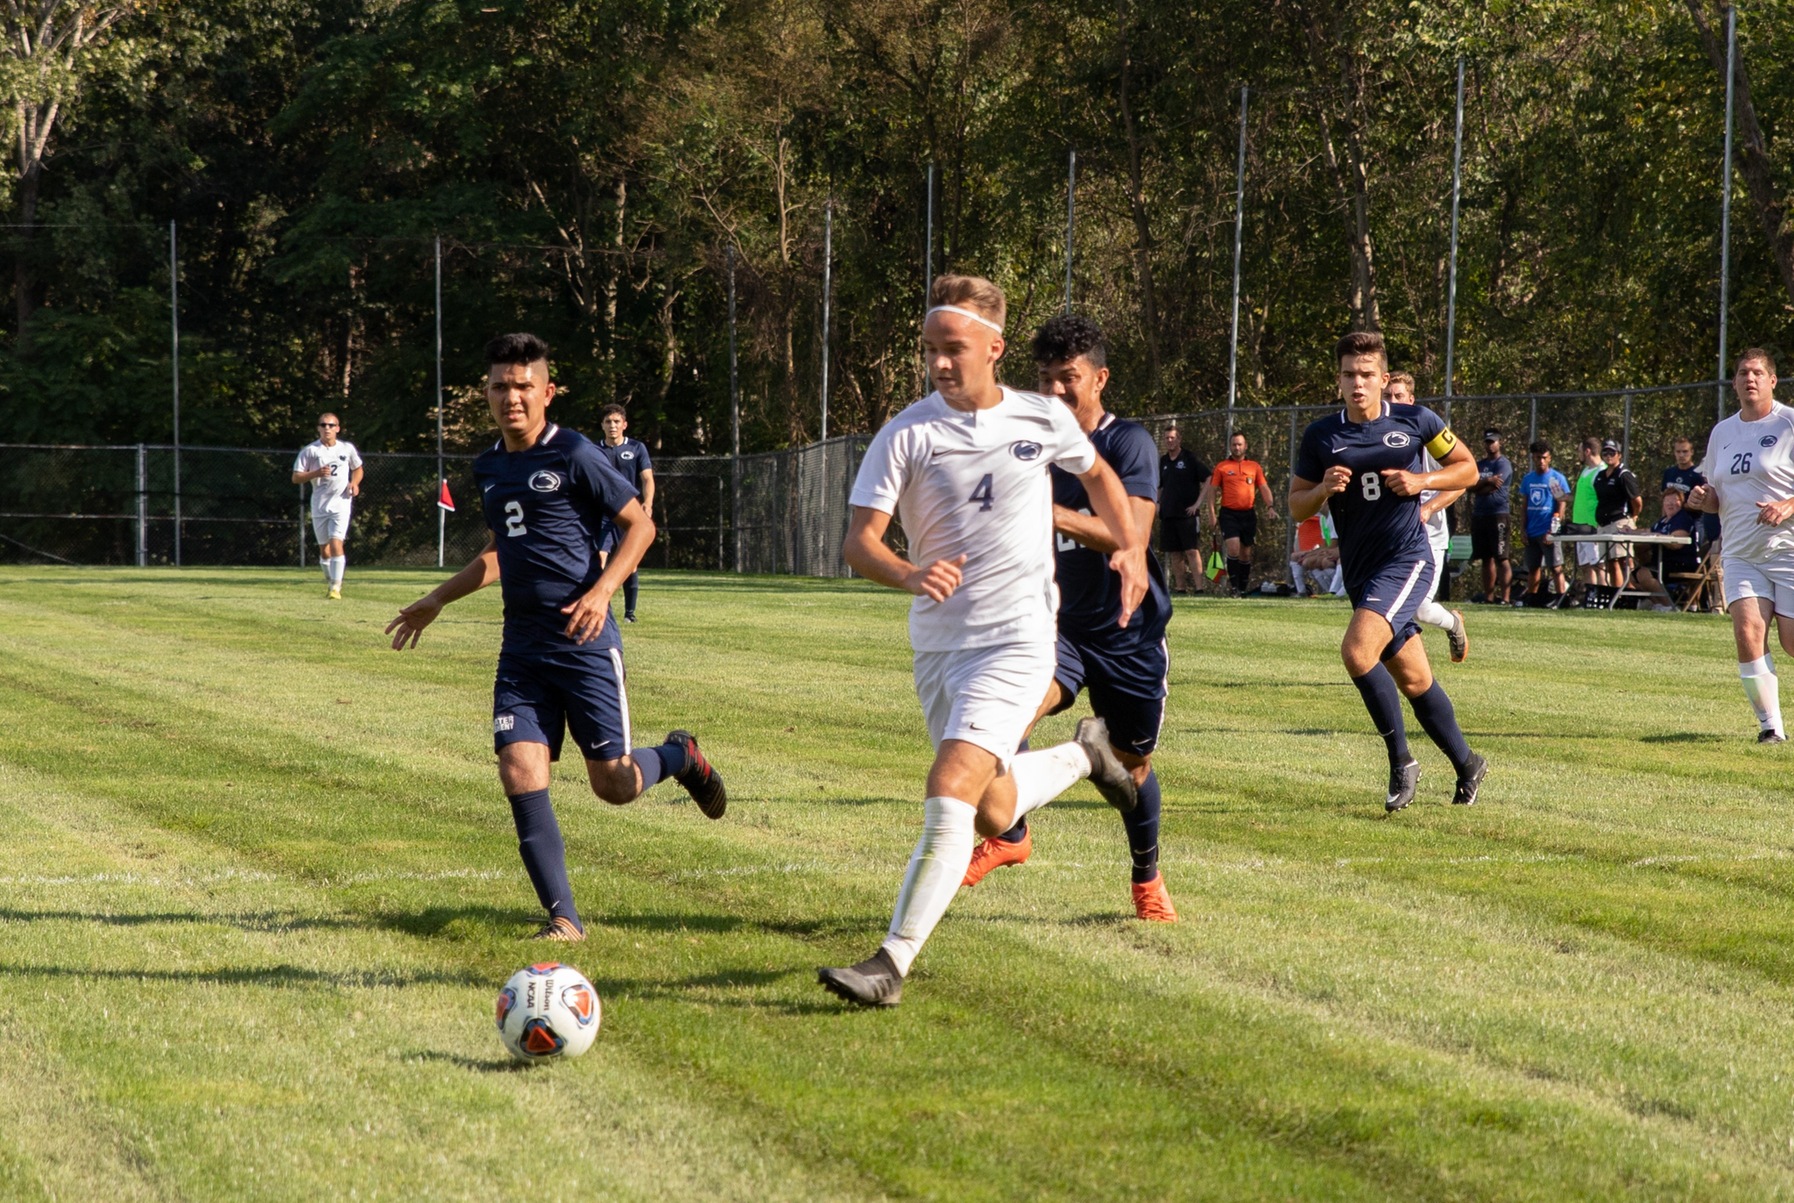 Men's soccer advances to PSUAC semifinals with win over Lehigh Valley